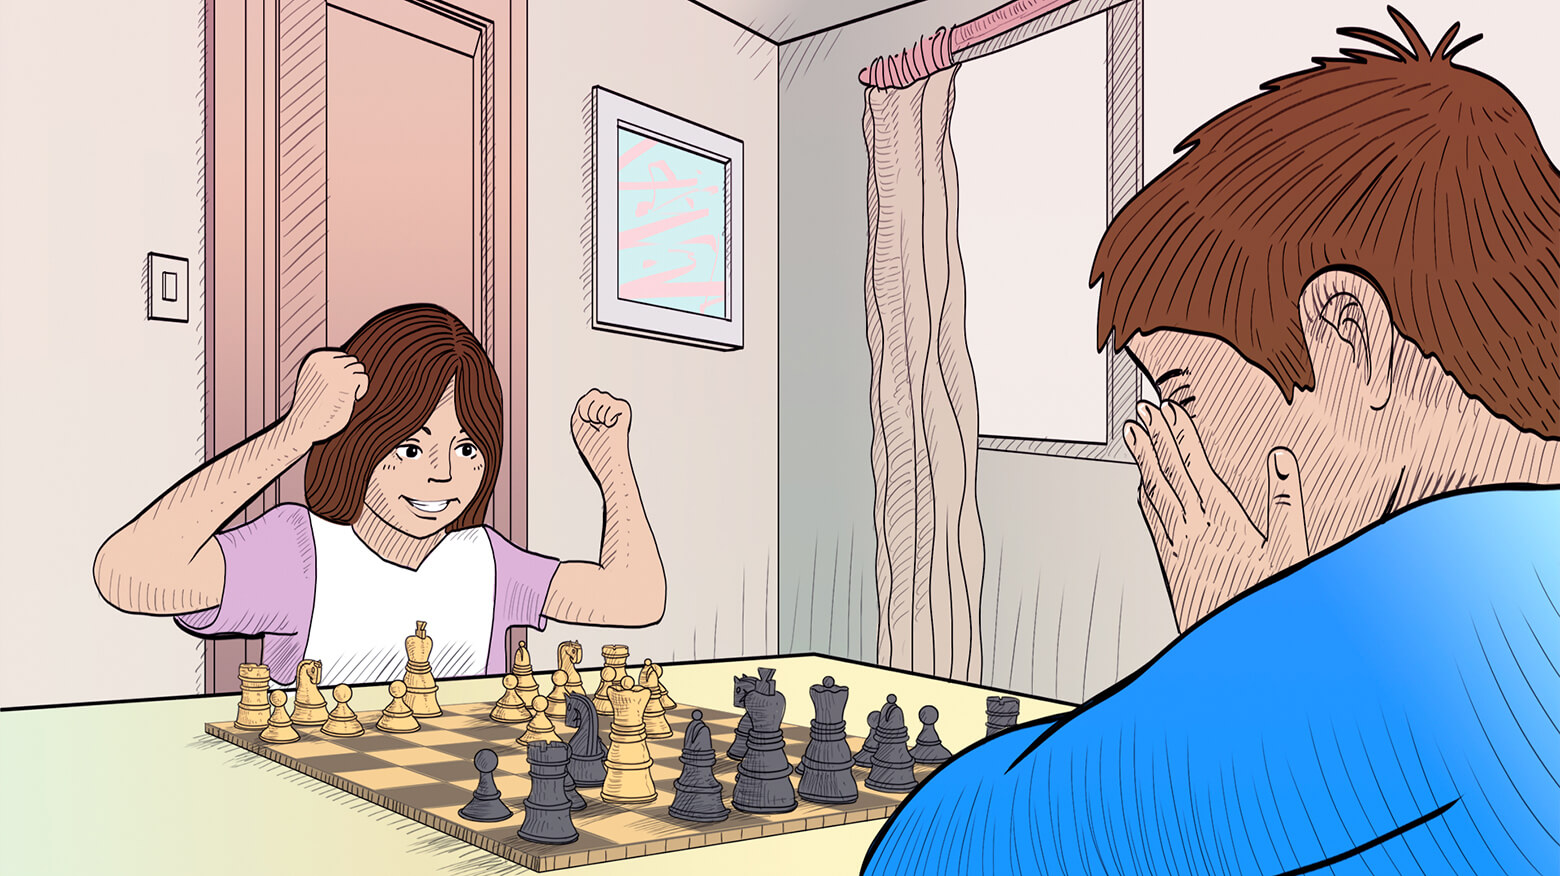 Play PlayStation Chessmaster II Online in your browser 